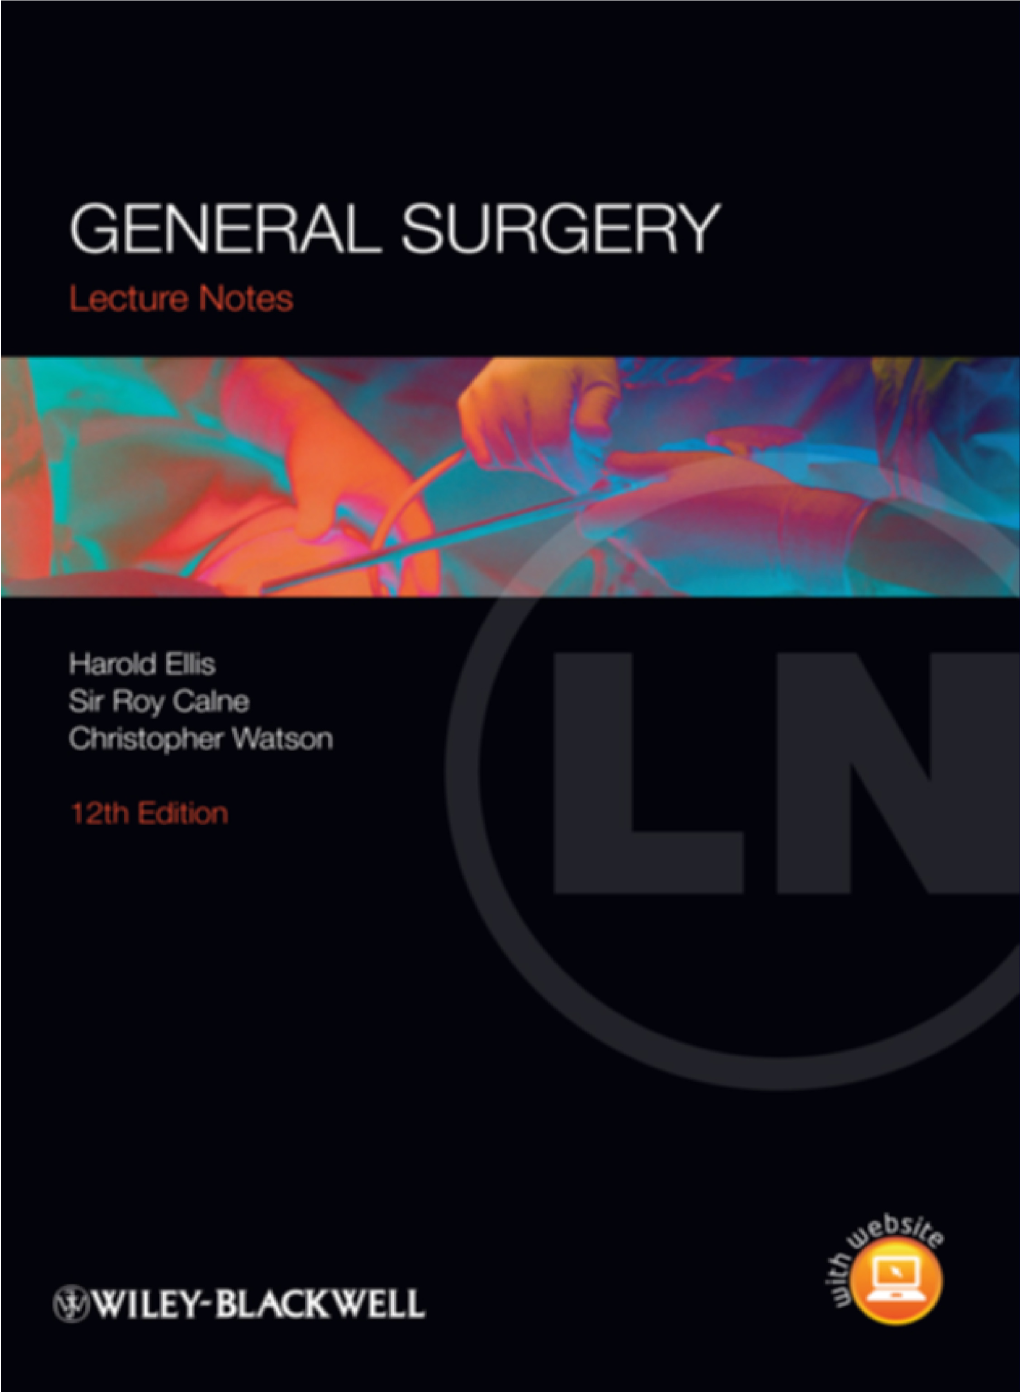 Lecture Notes- General Surgery